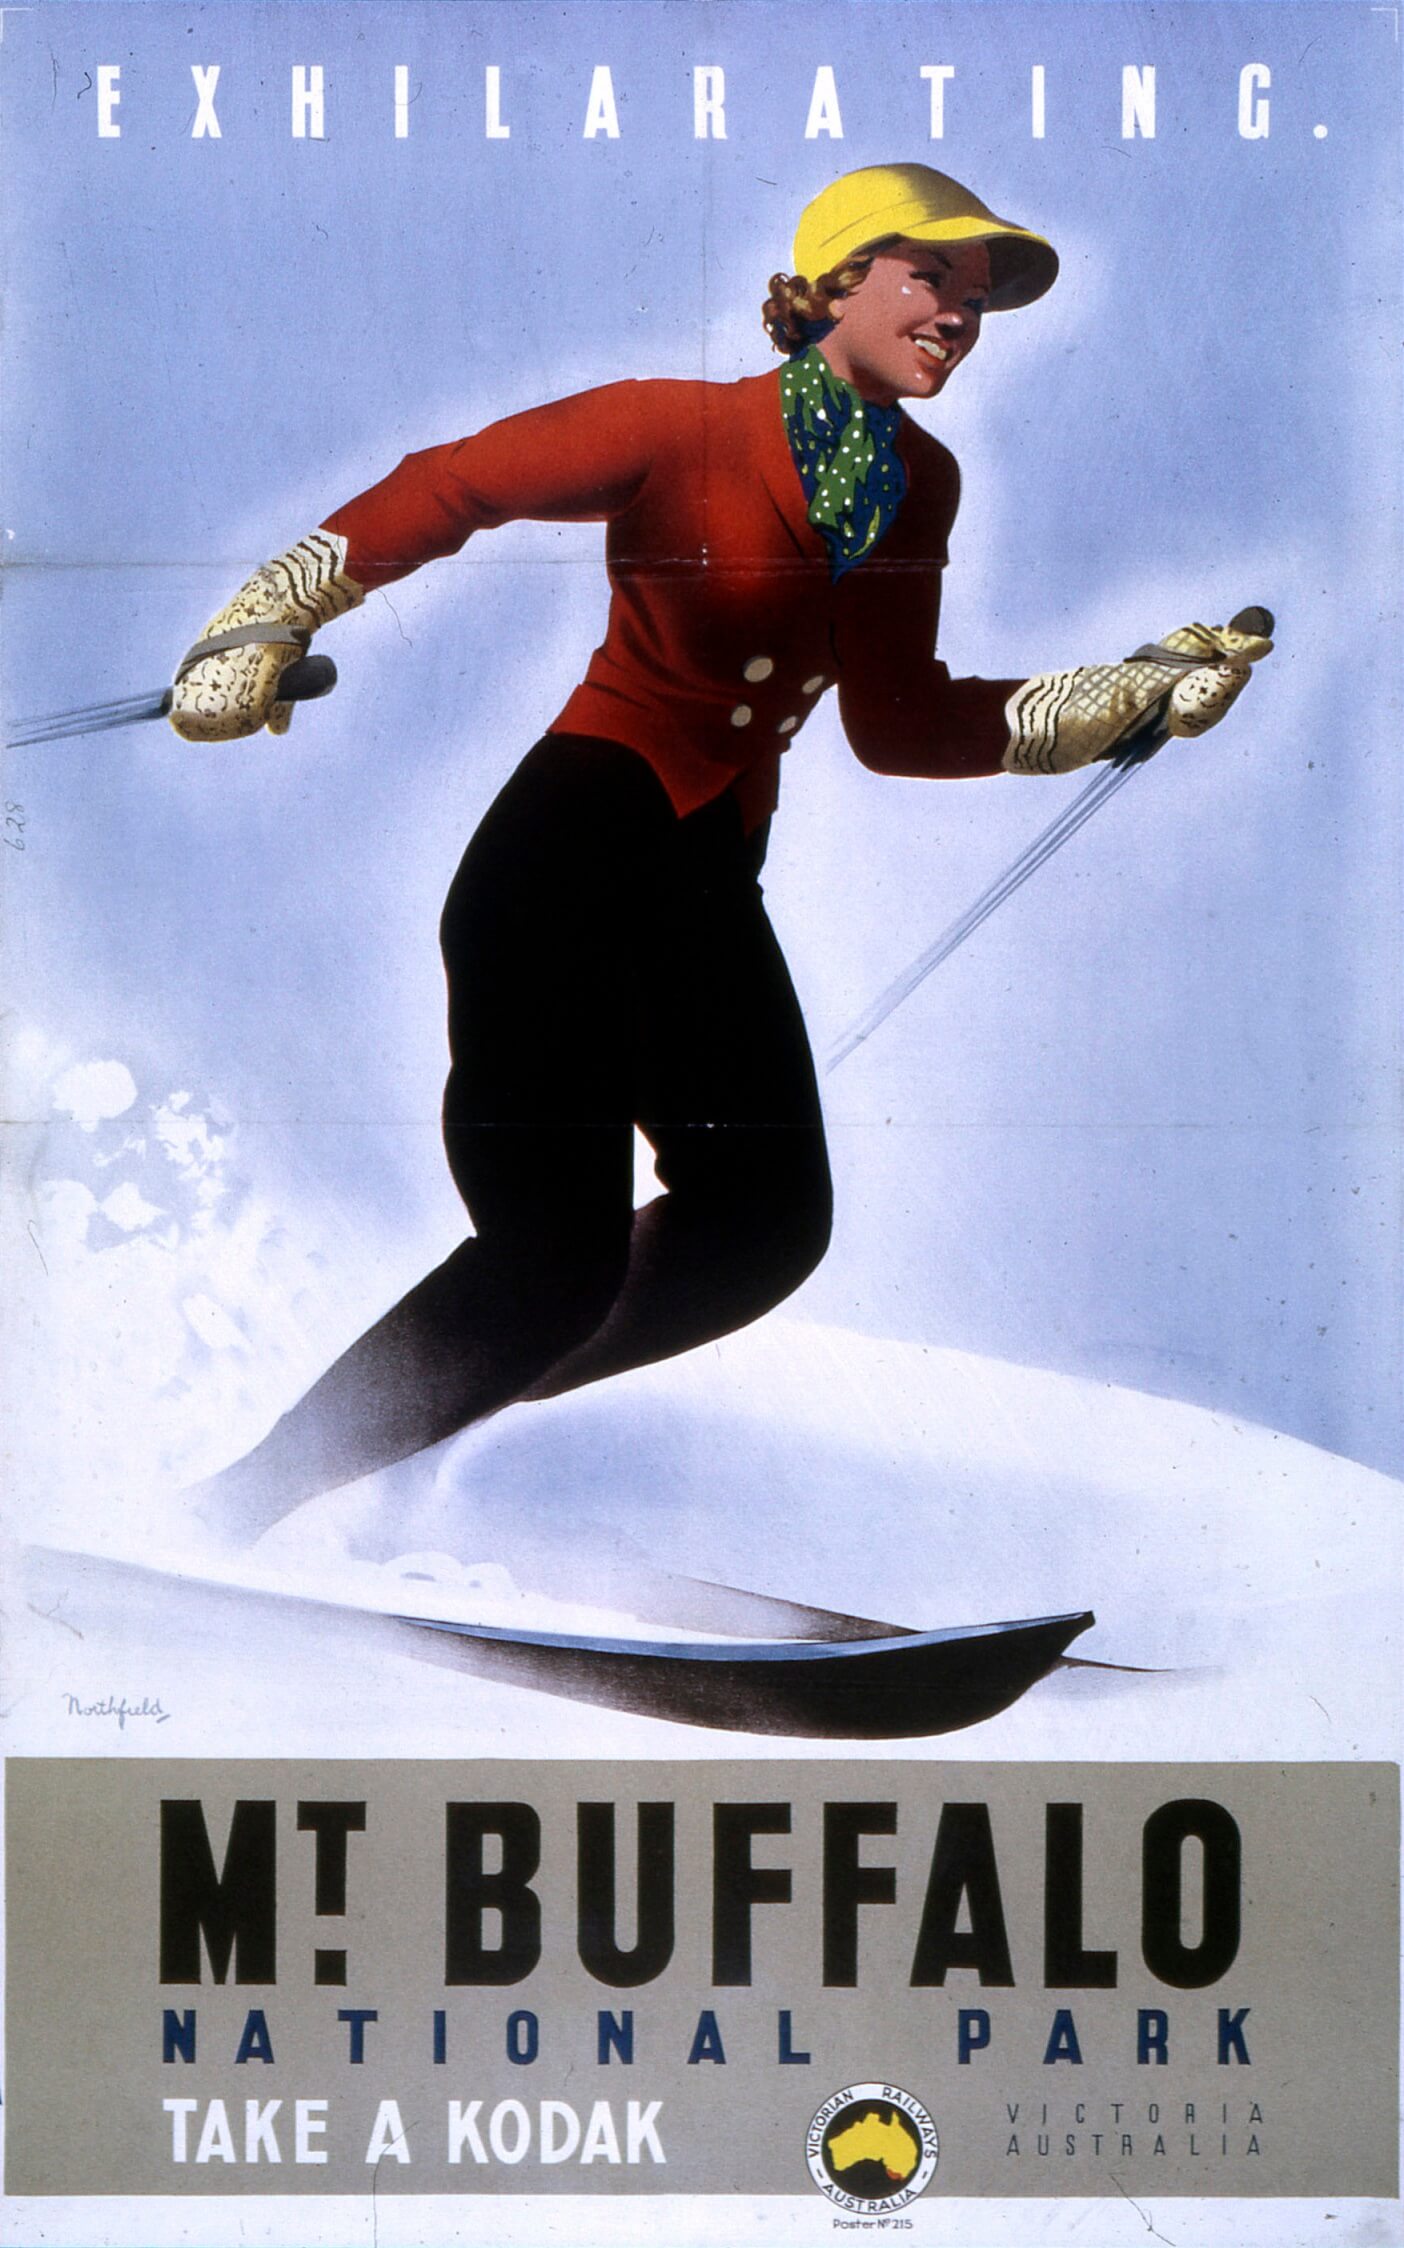 Travel poster for "Mt Buffalo National Park". The drawn image show a stylised woman skiing with a flurry of snow behind her. She is white with short brown hair in a 1930s style and is smiling. She wears a yellow cap, green and white polka dot ascot, red double breasted jacket and black pants.